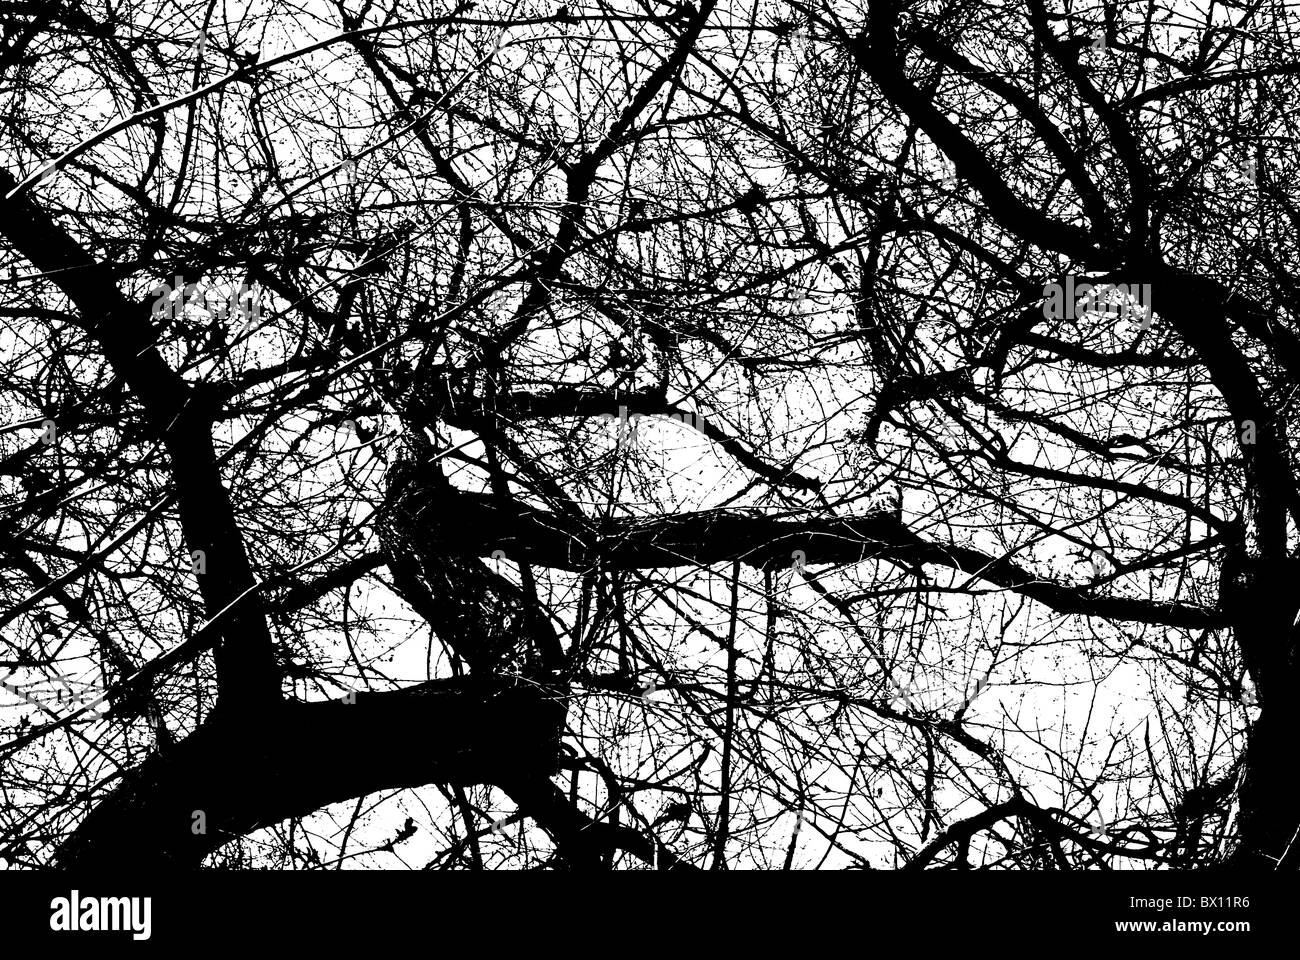 early spring black and white trees without leaves Stock Photo